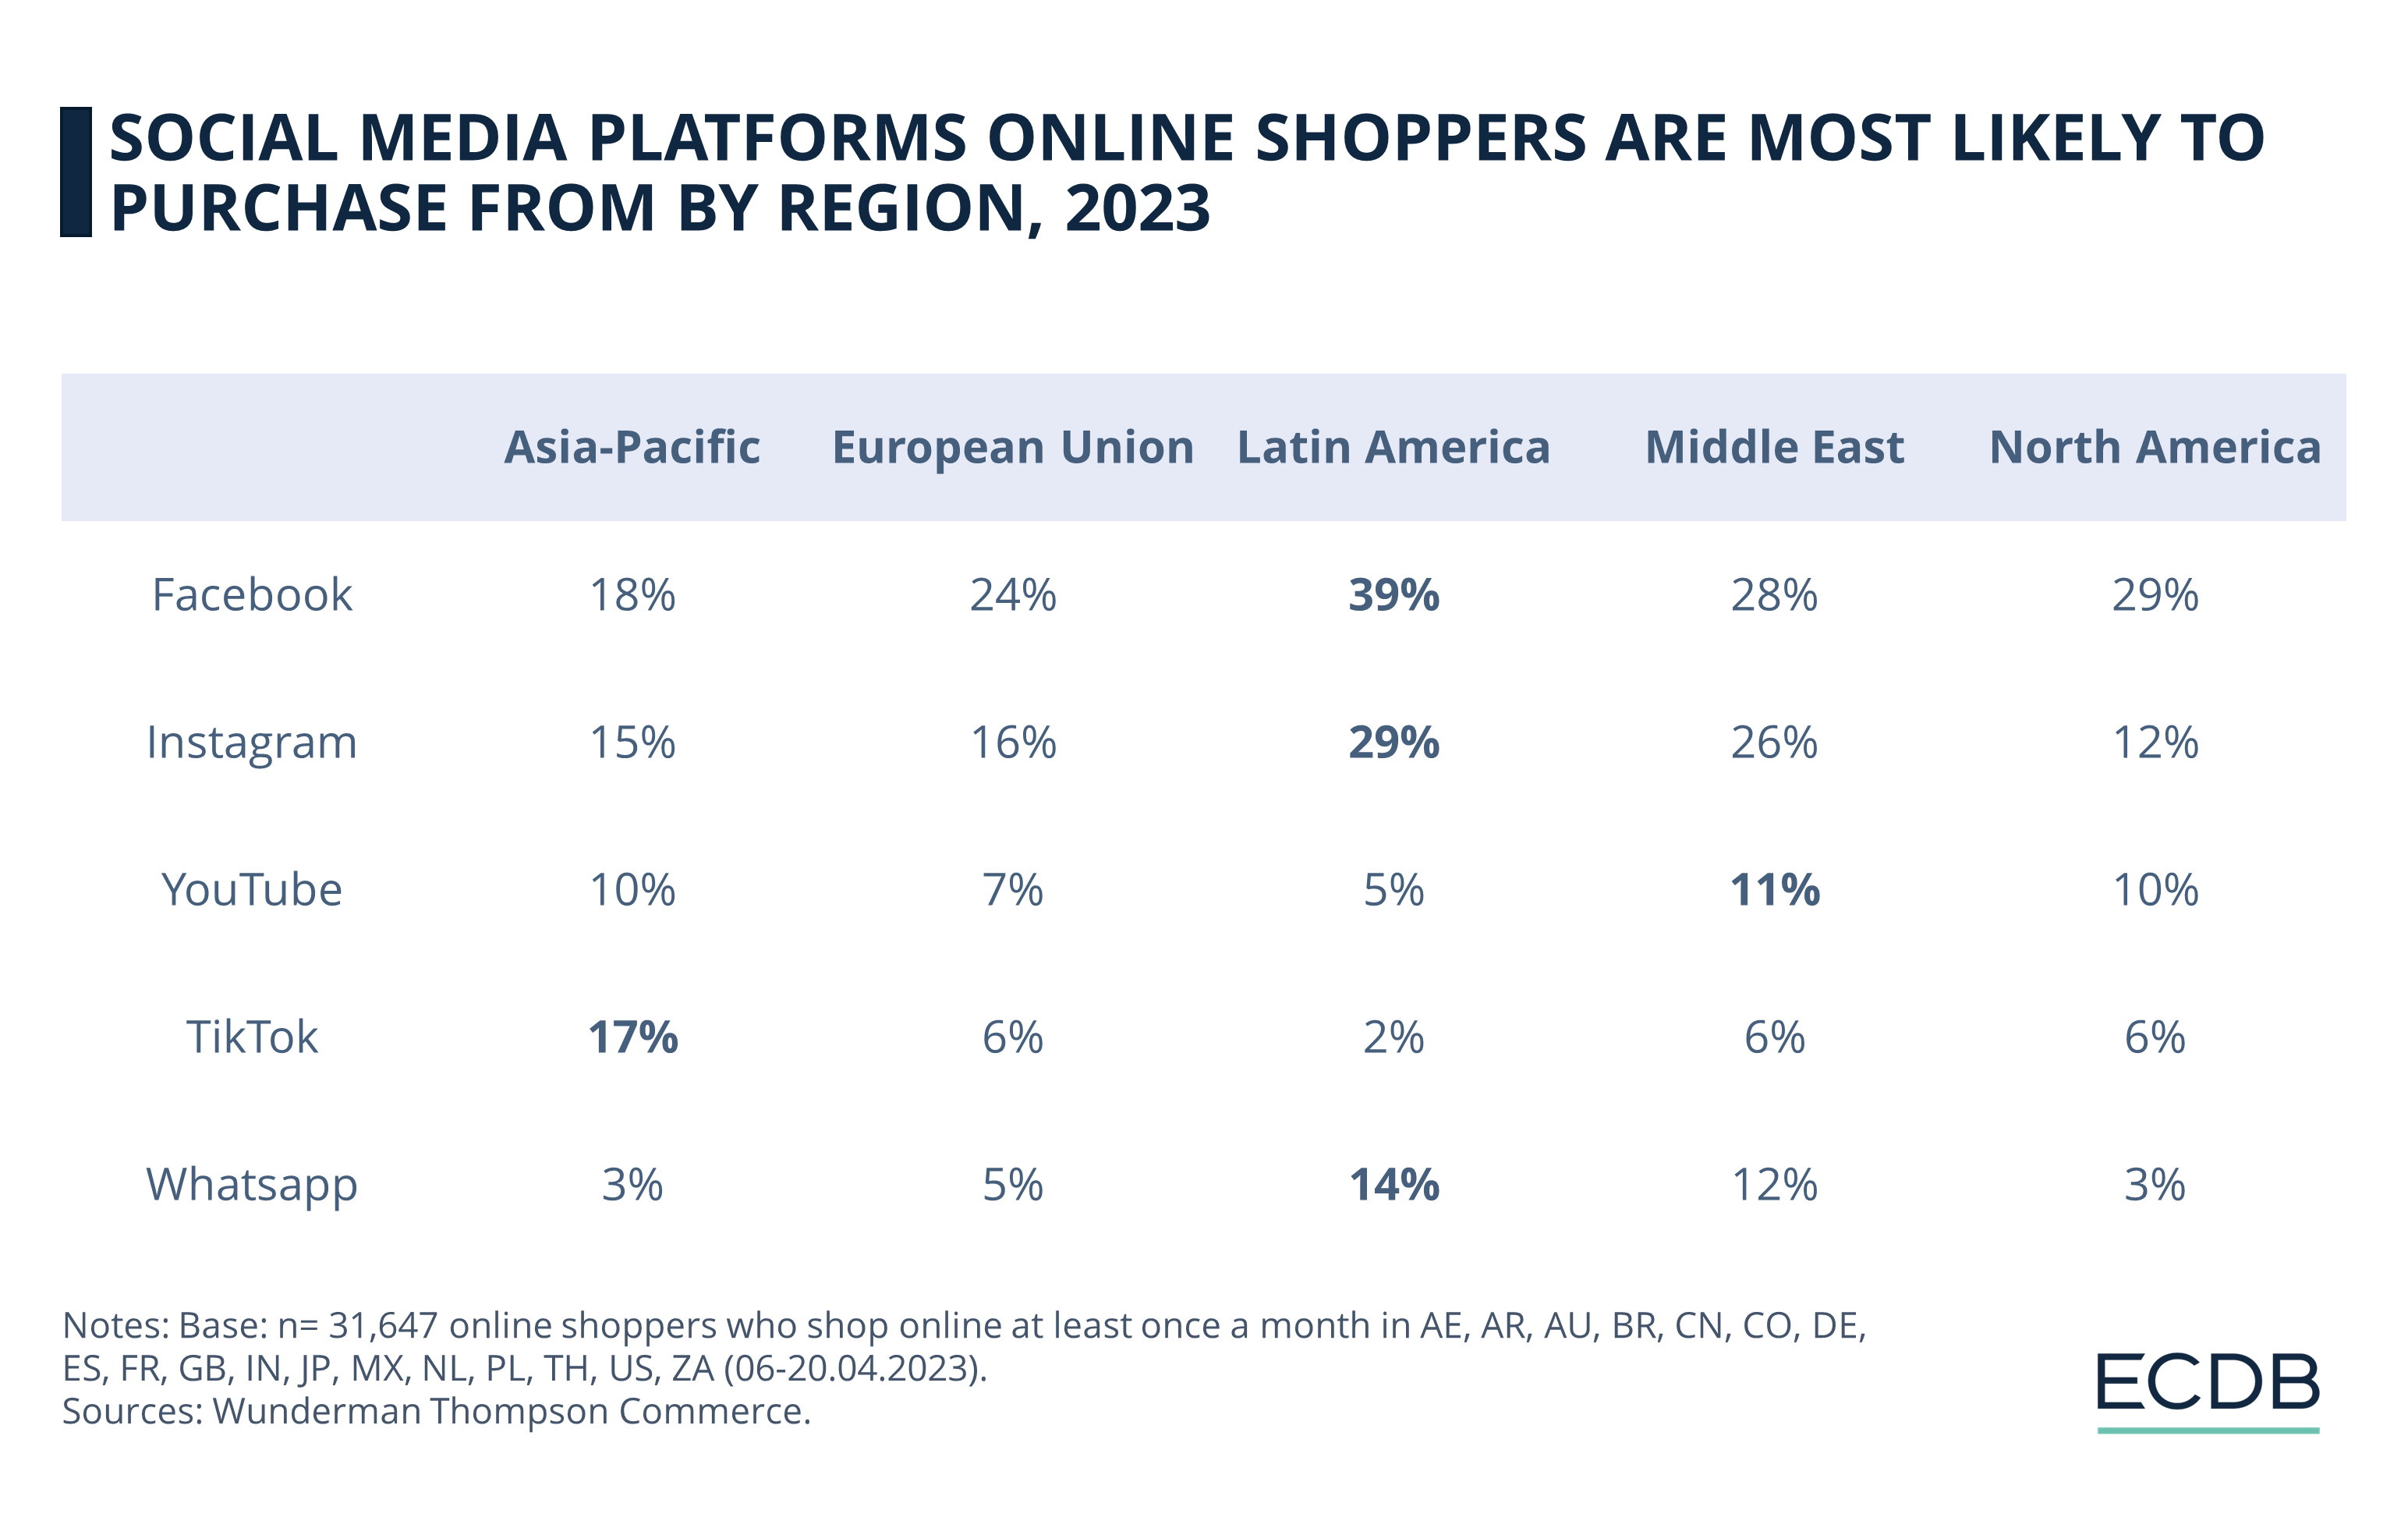 Social Media Platforms Online Shoppers Are Most Likely To Purchase From by Region, 2023